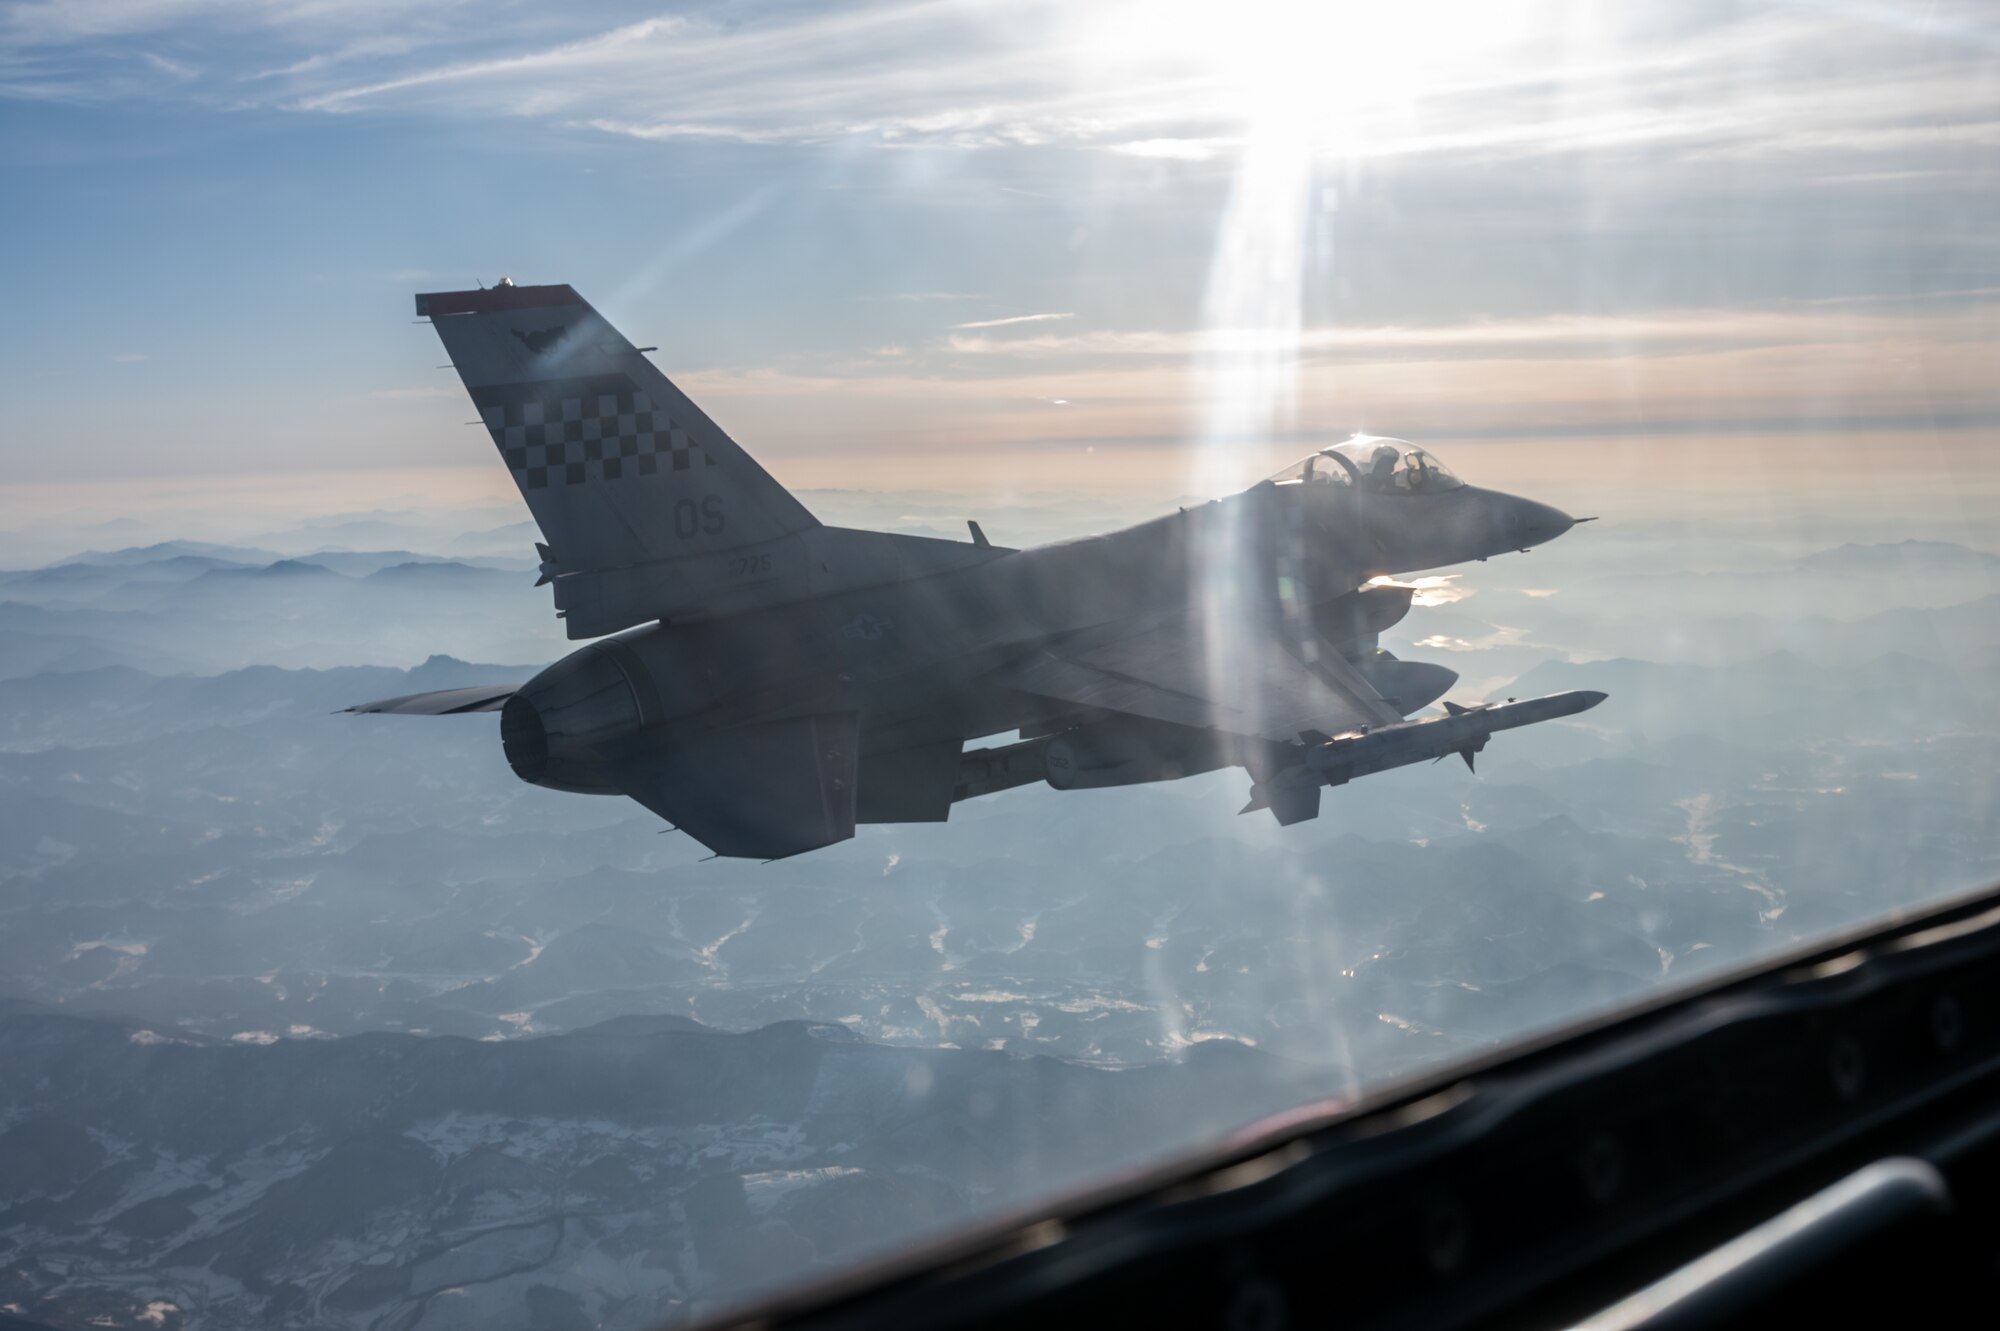 A U.S. Air Force F-16 Fighting Falcon assigned to the 36th Fighter Squadron participates in close air support training over Gyeonggi-do, Republic of Korea, Dec. 20, 2022.